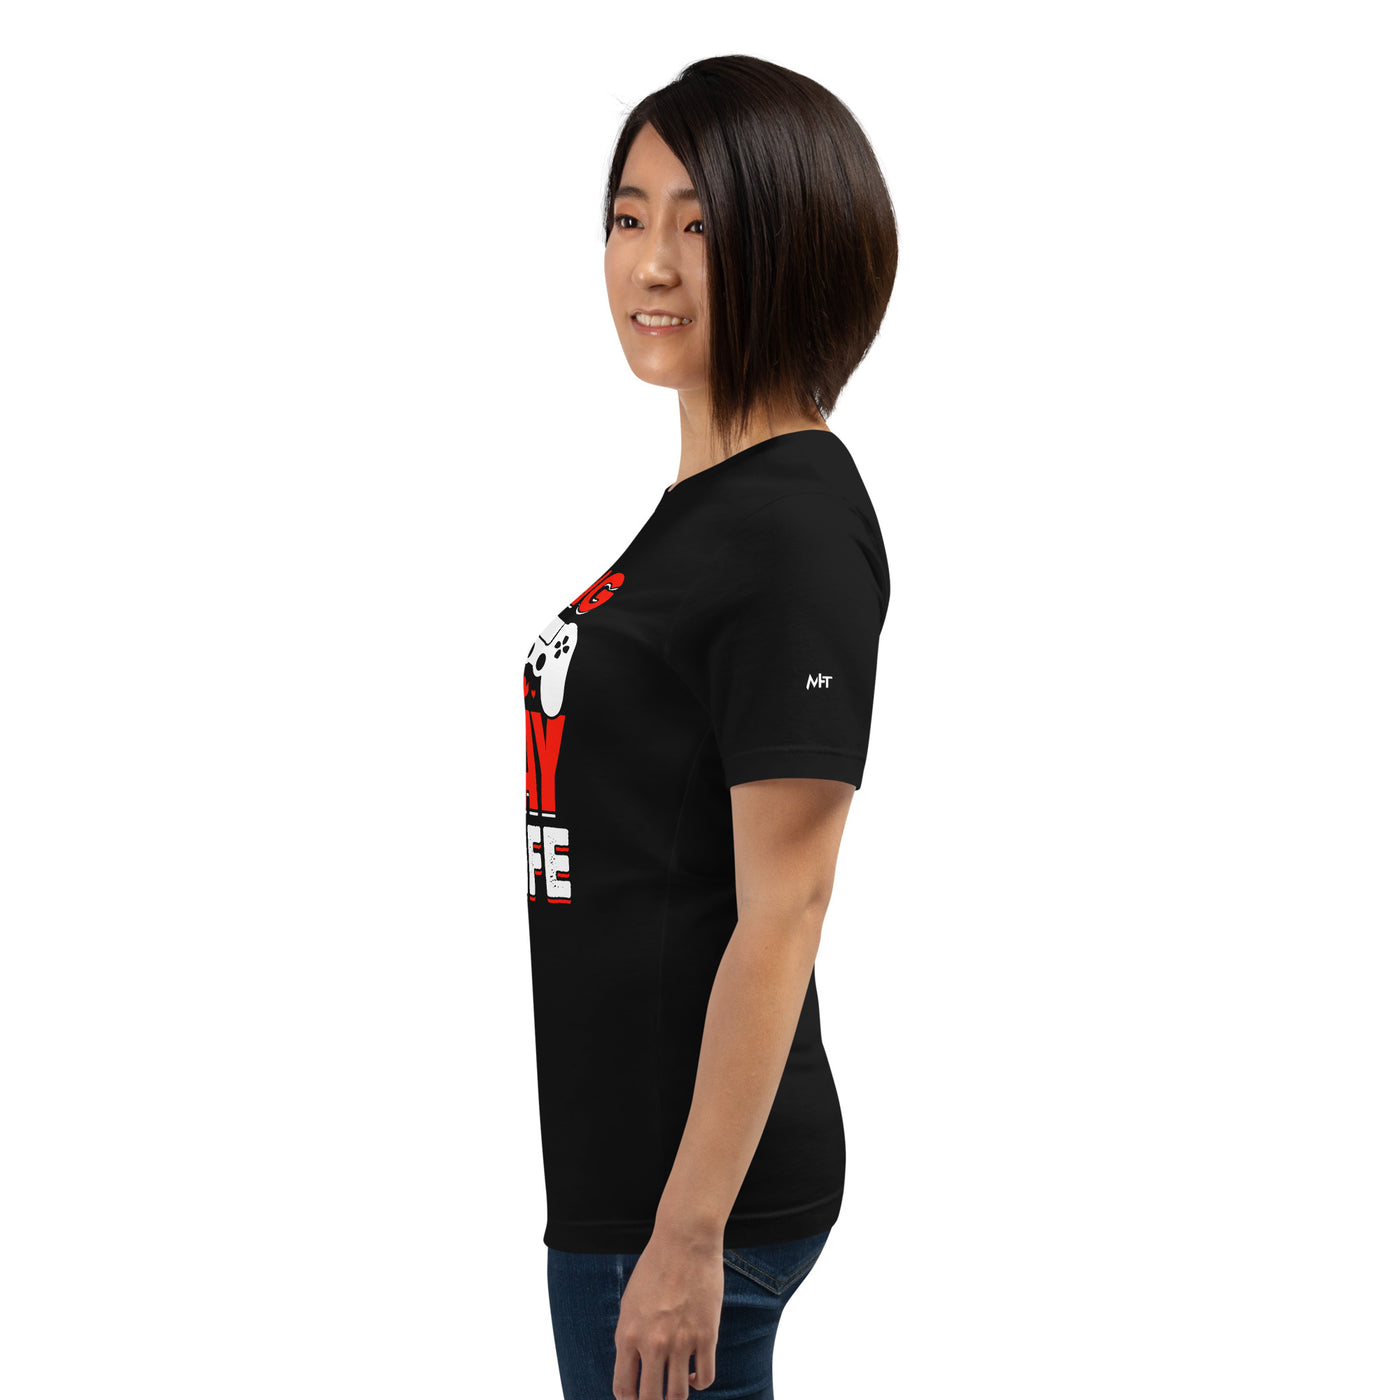 Gaming is way of life - Unisex t-shirt